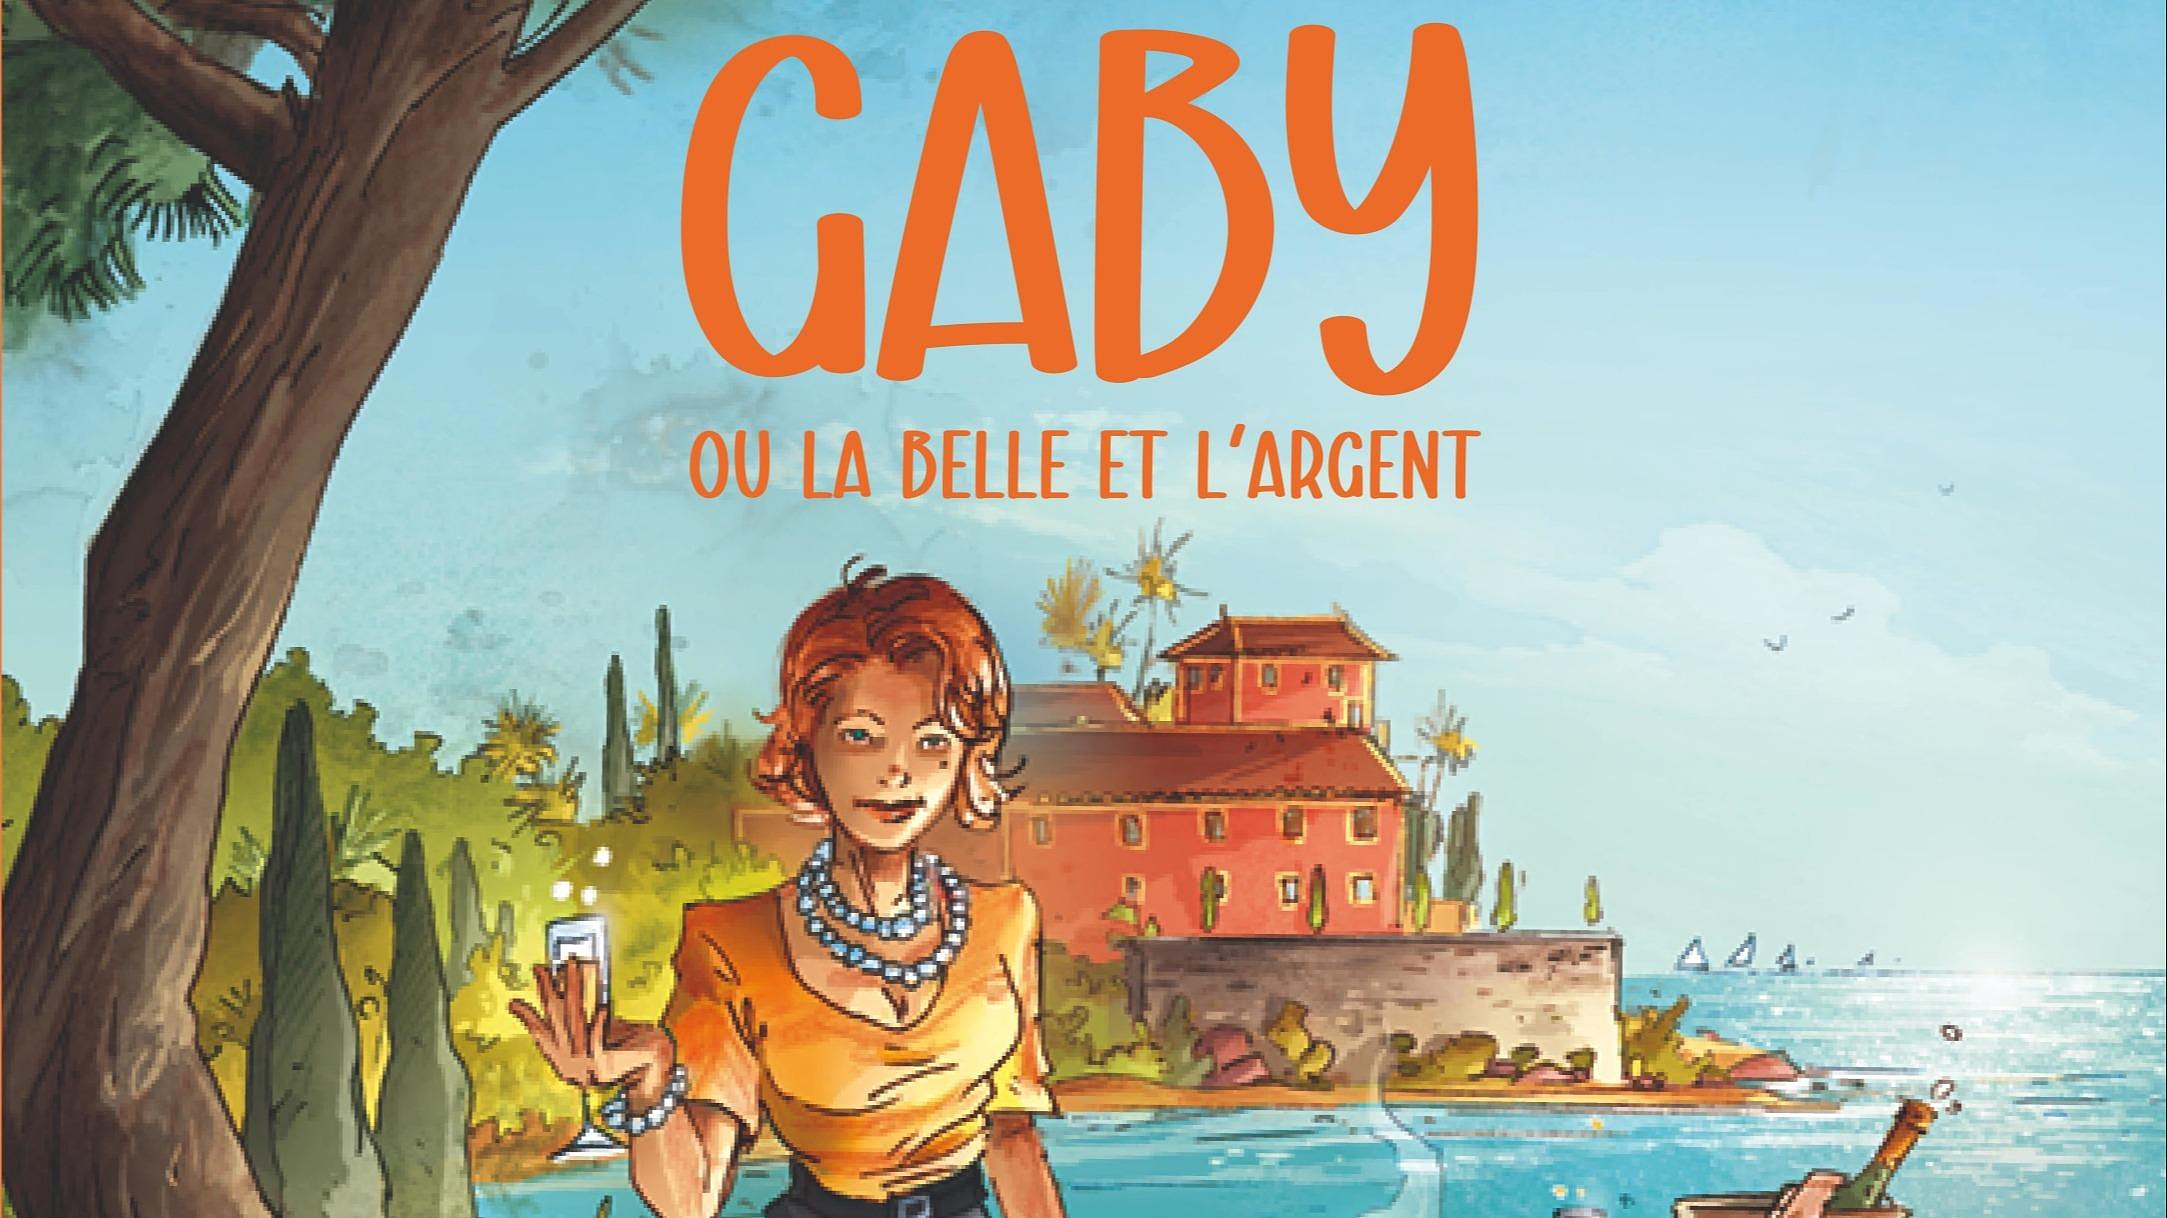 Gaby, a new play by Pagnol adapted into a comic strip